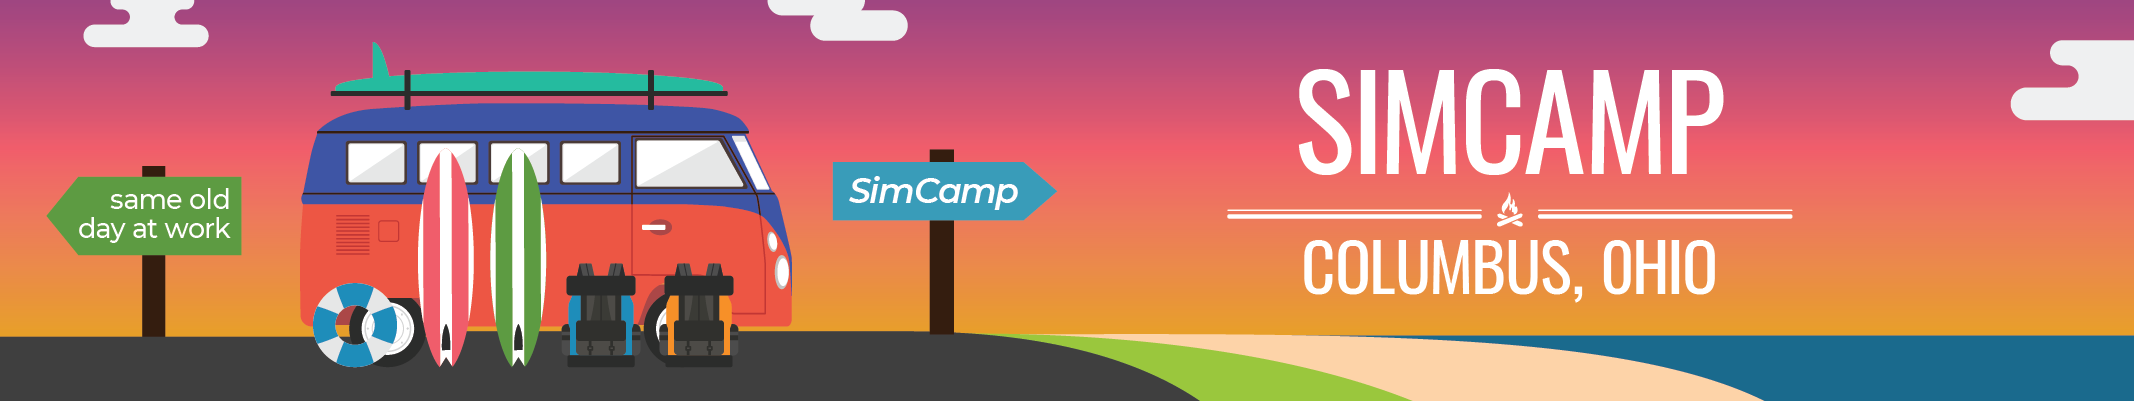 Learn more about simcamp